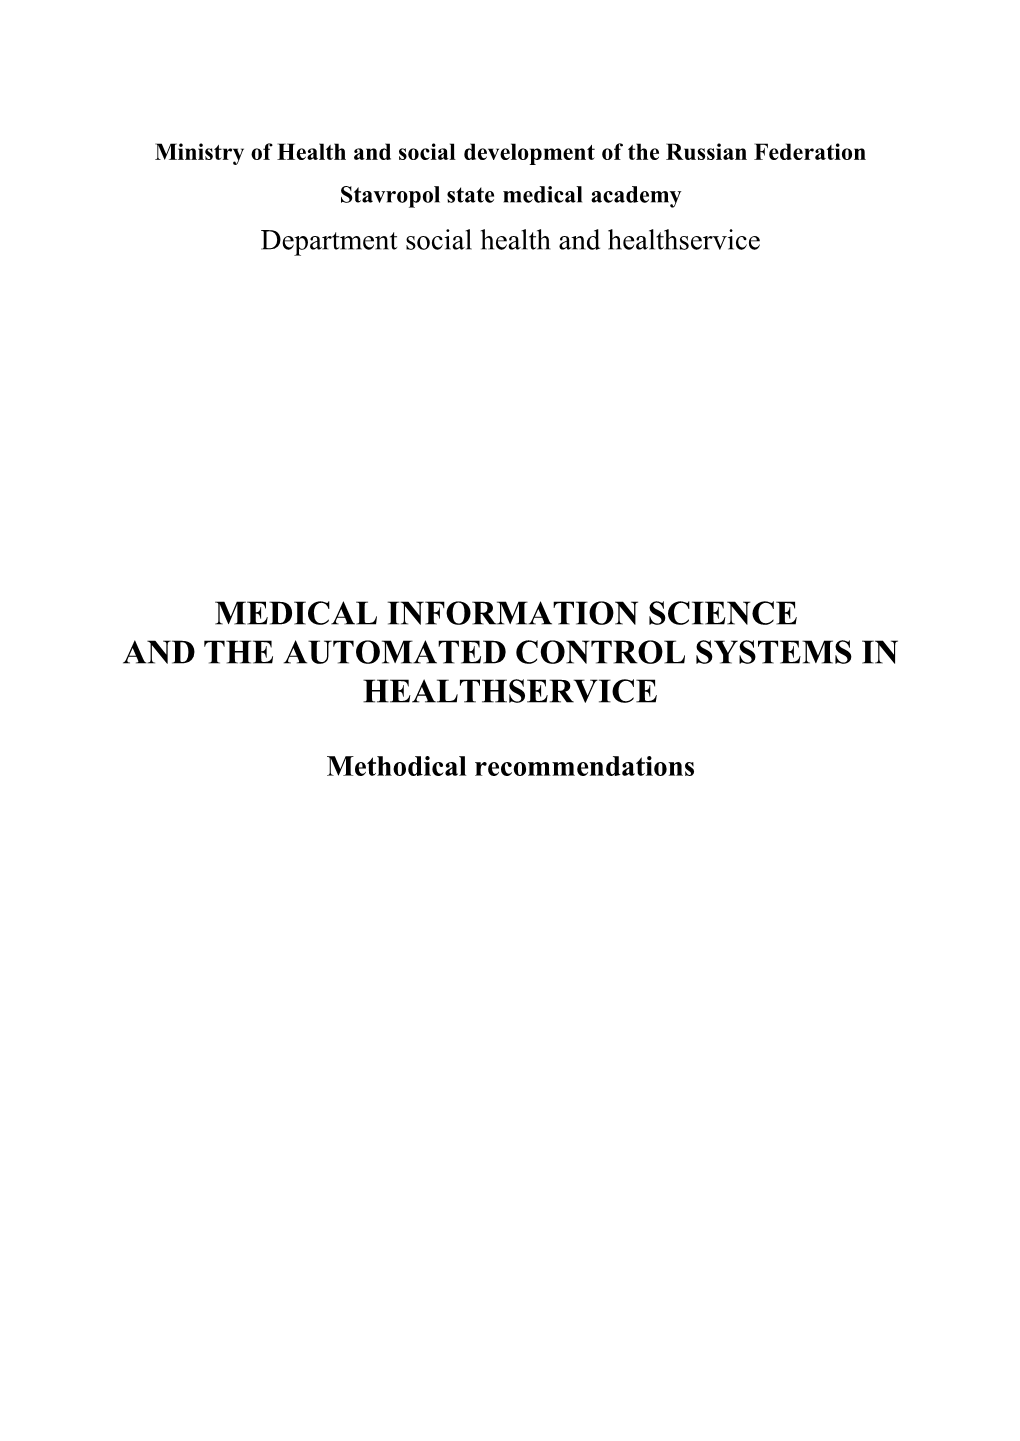 Ministry of Health and Socialdevelopment of the Russian Federation